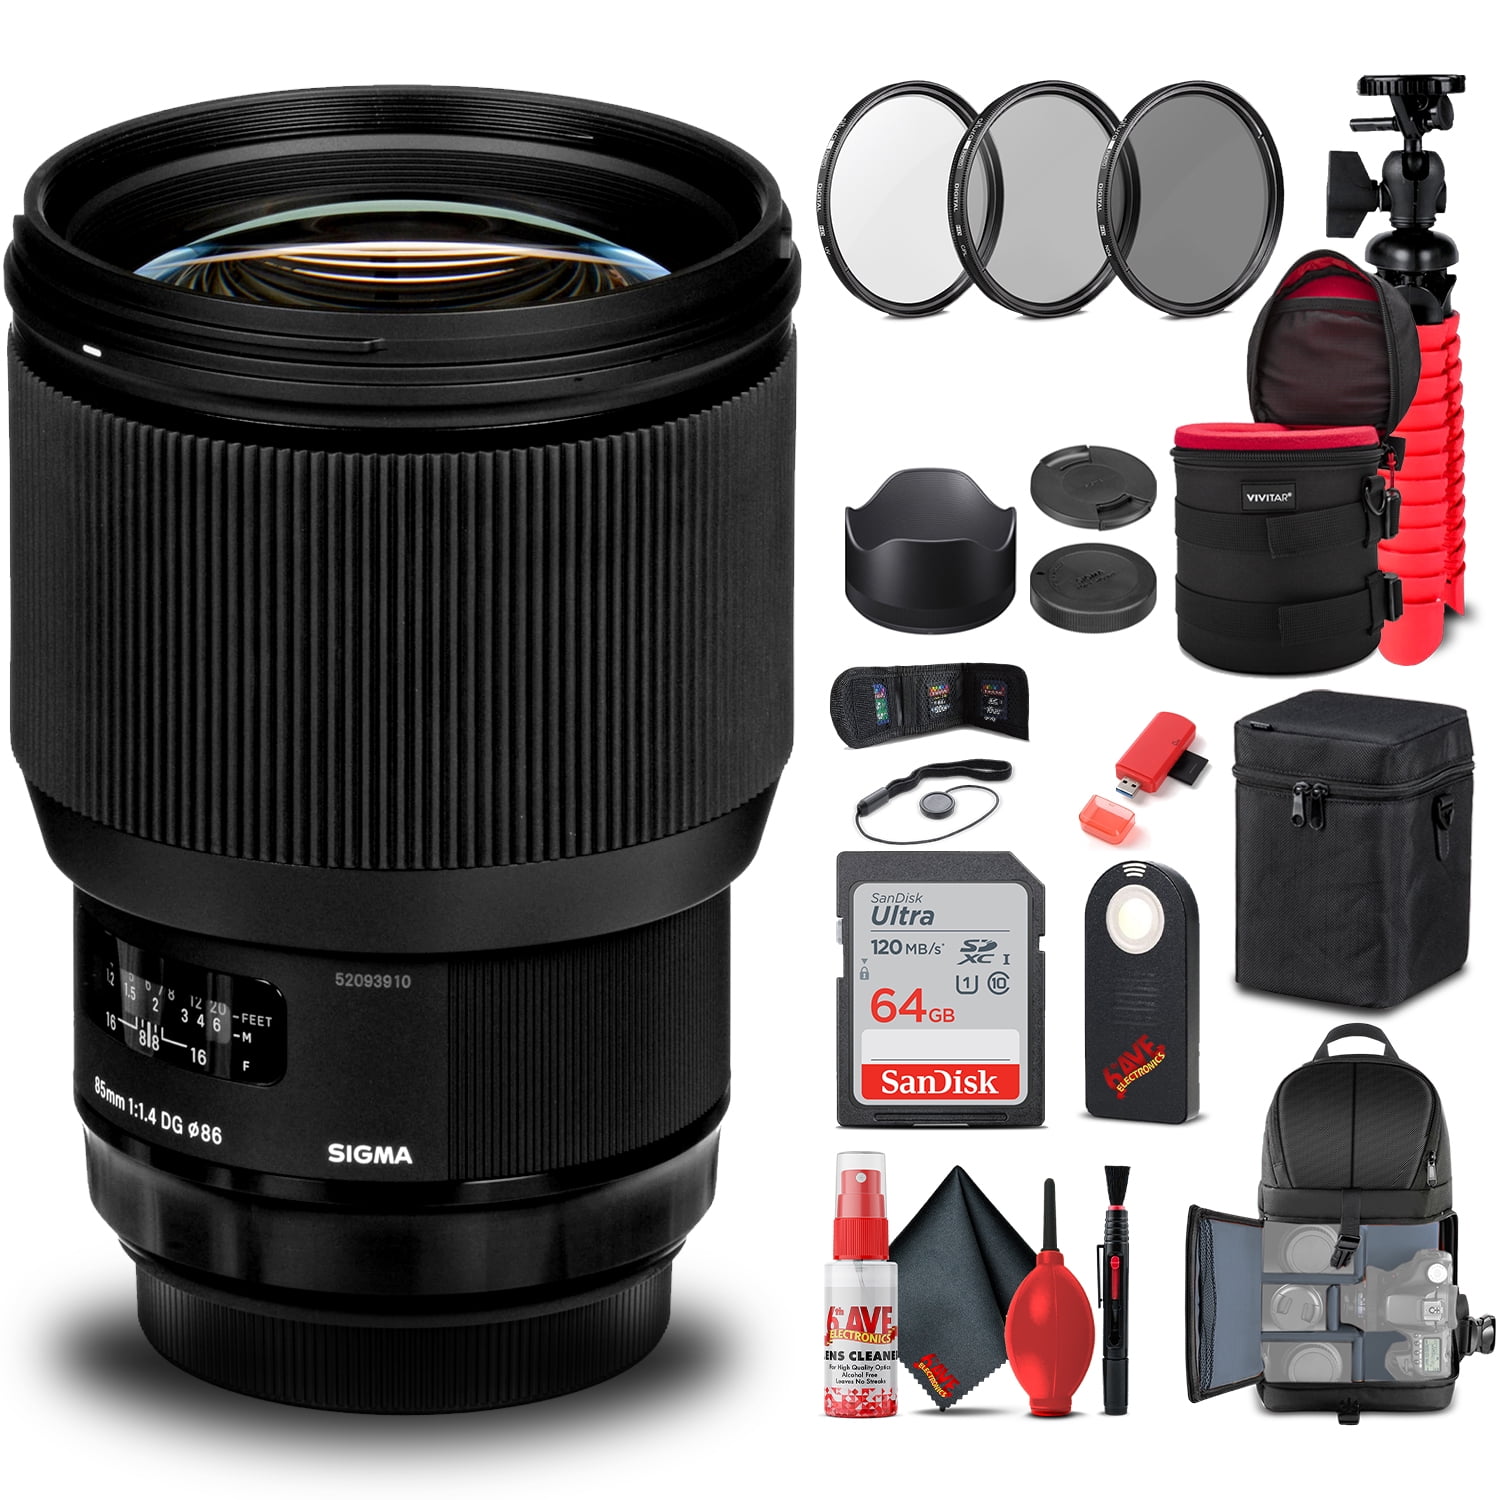 Bundle with 49mm Filter KIt Lens Wrap Cleaning KIt PC Software Package Sigma 70mm f/2.8 DG Art Macro Lens for F/Sony E Cameras Flex Lens Shade Capleash 